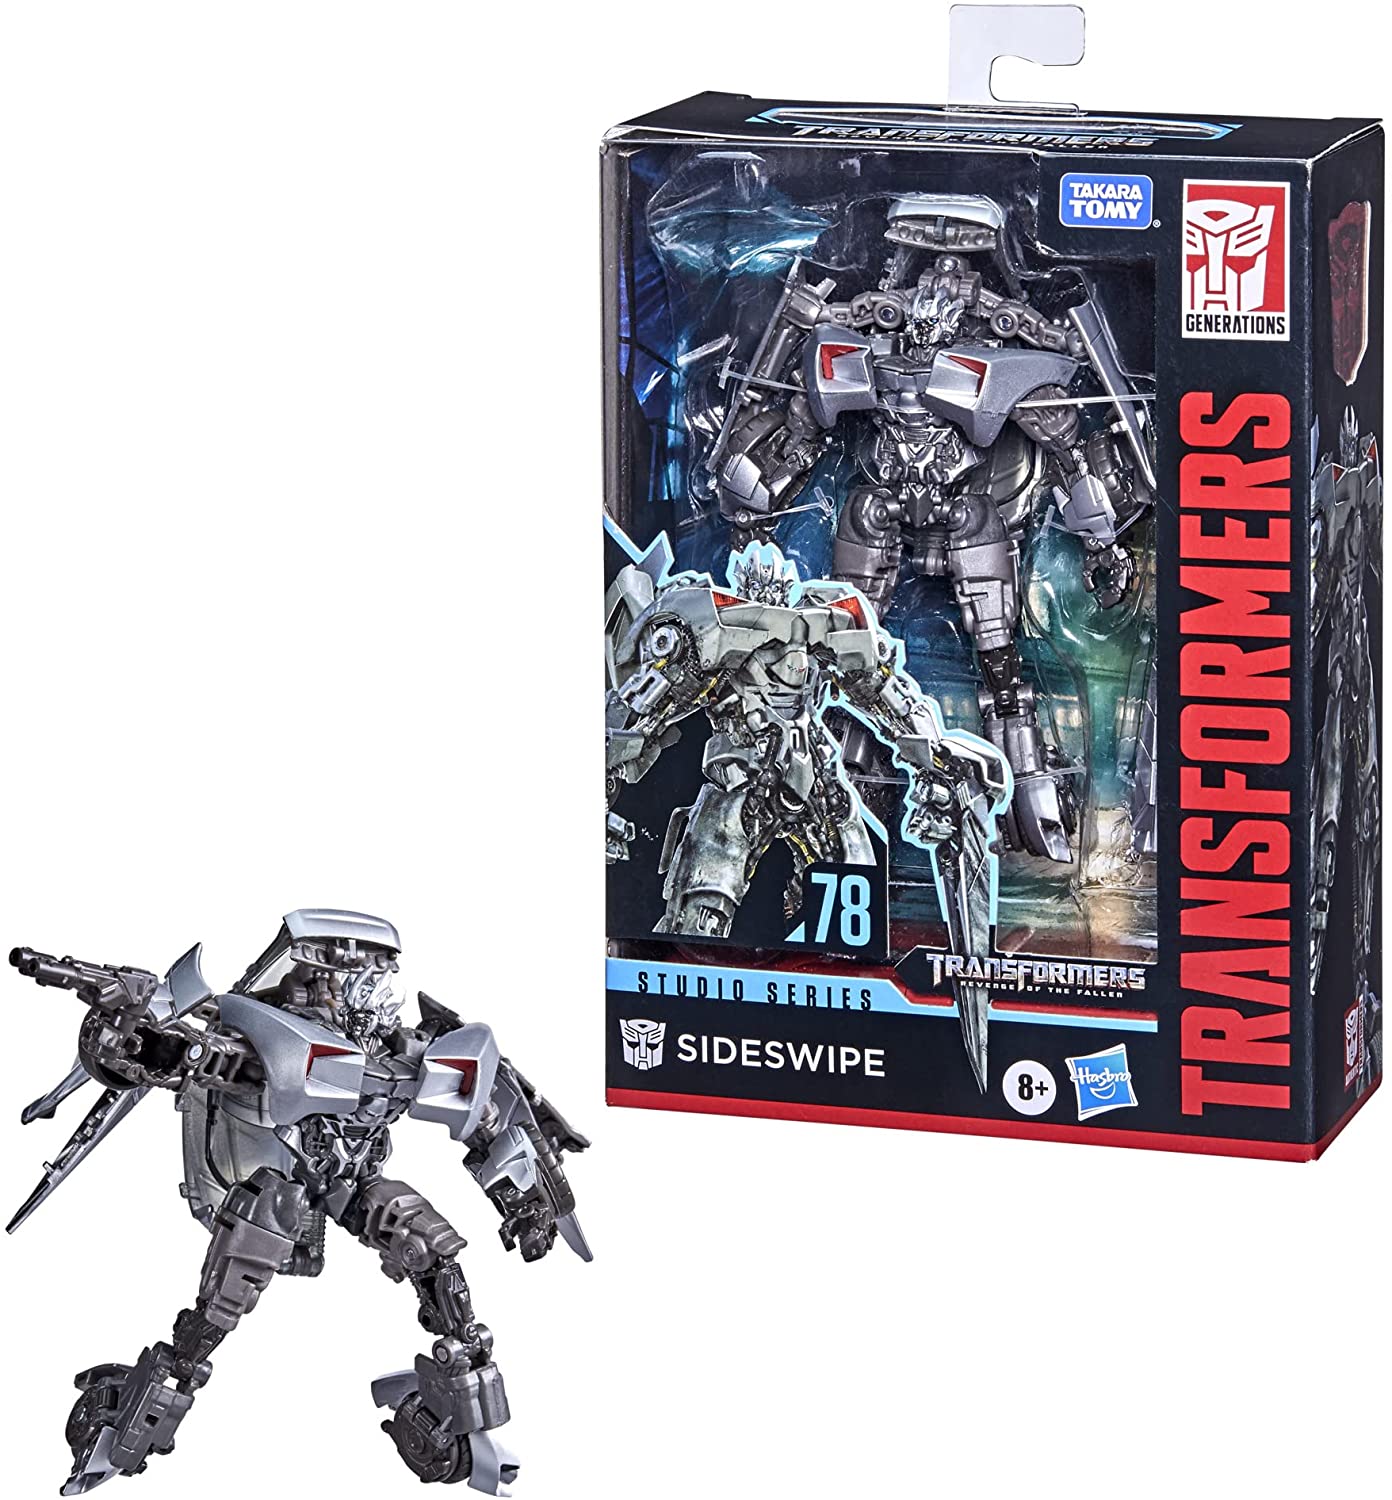 Transformers Toys Studio Series 78 Deluxe Class Revenge of The Fallen Sideswipe Action Figure - Ages 8 and Up, 4.5-inch